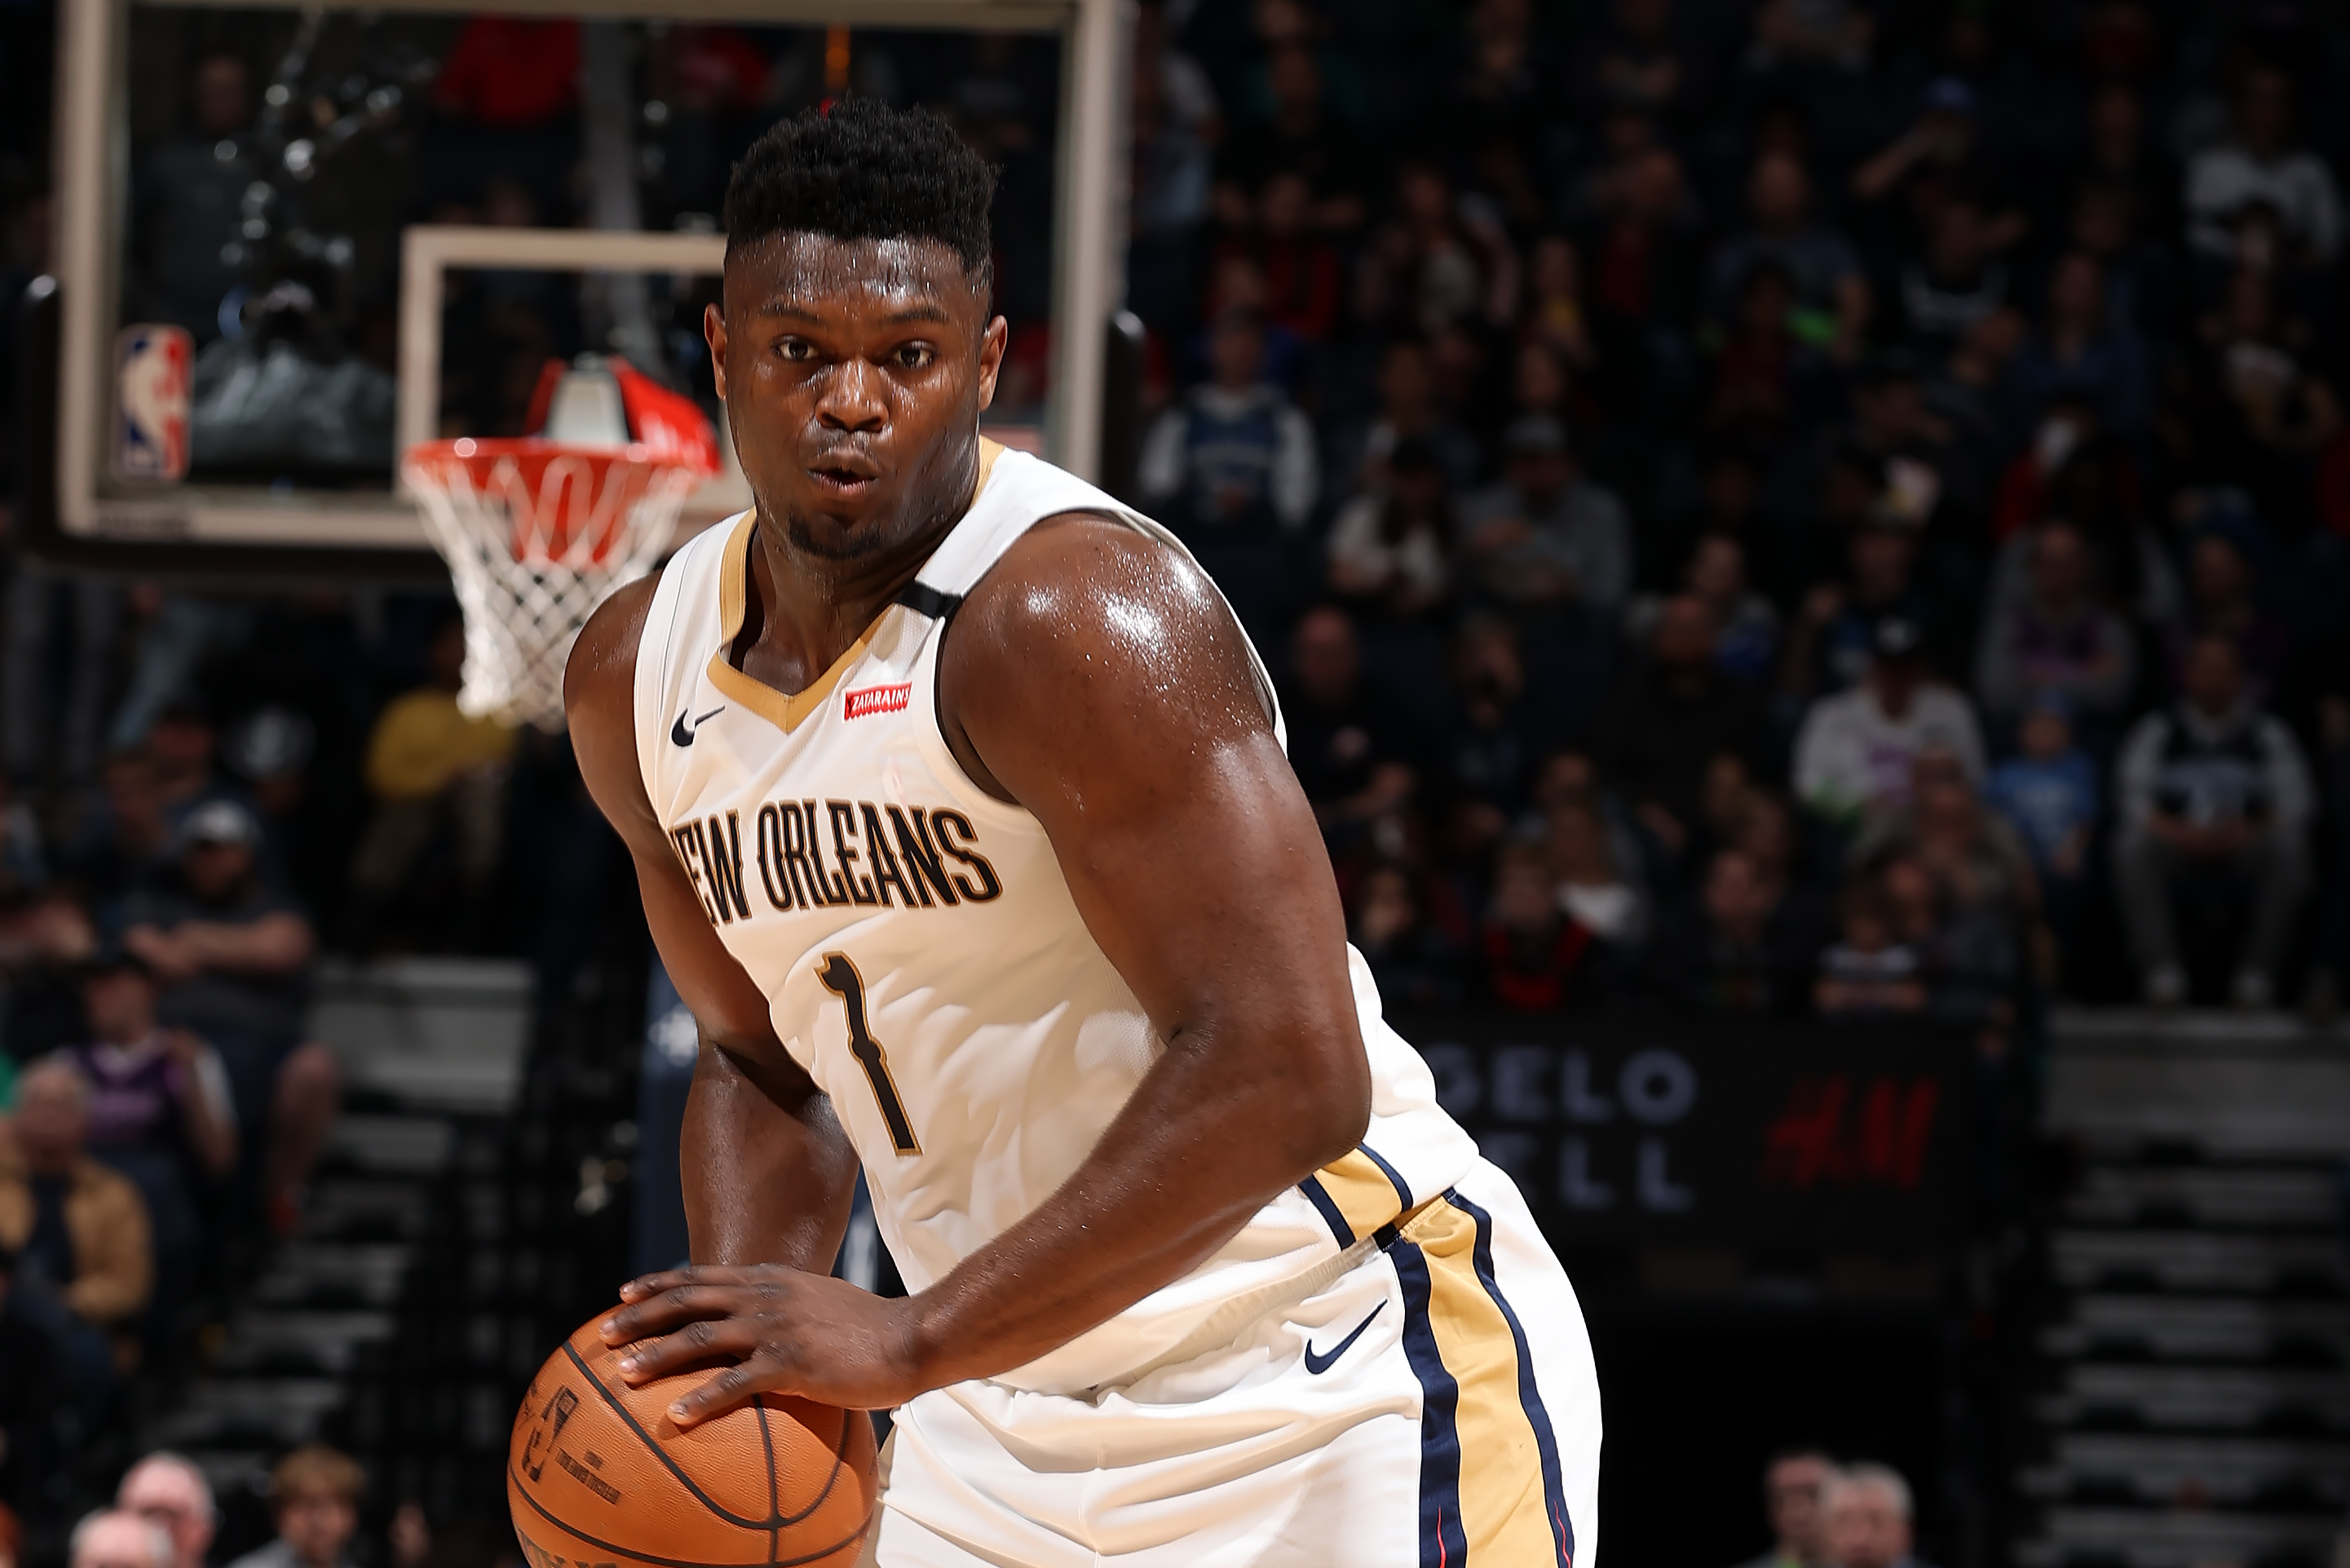 Zion Williamson is being used like a running back by the Pelicans